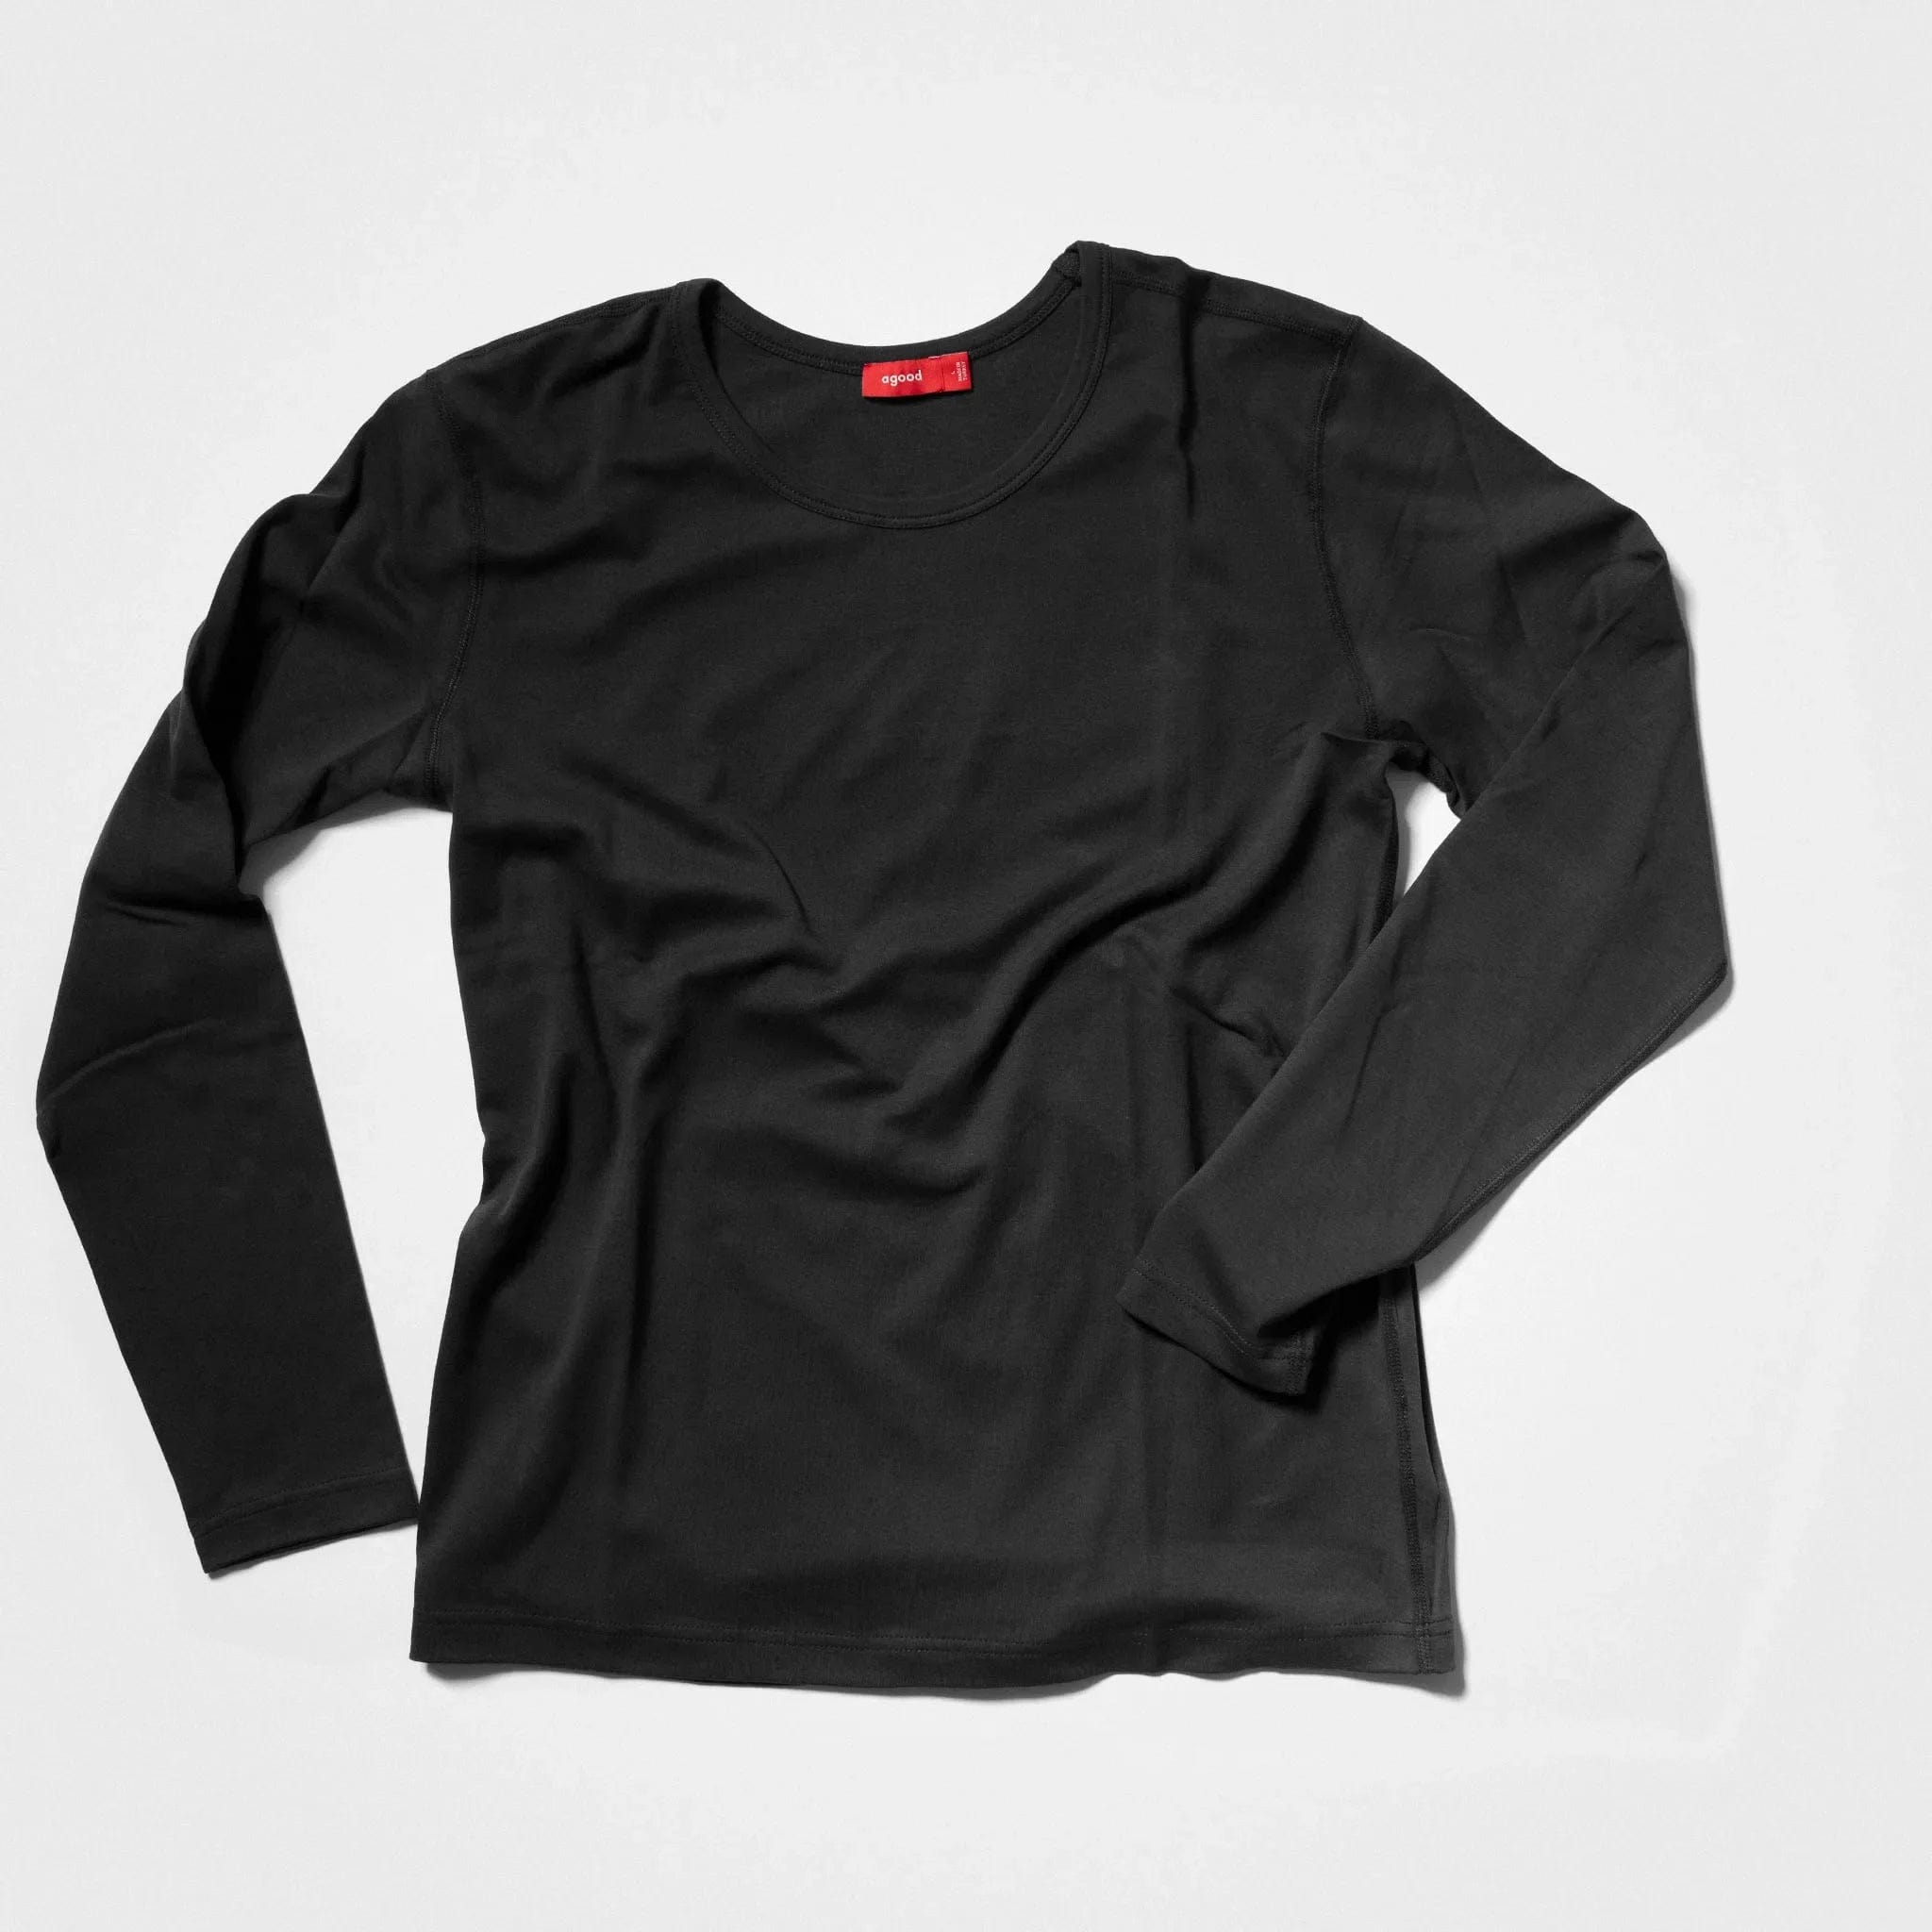 Black Long-Sleeved T-Shirt Made from Organic Cotton